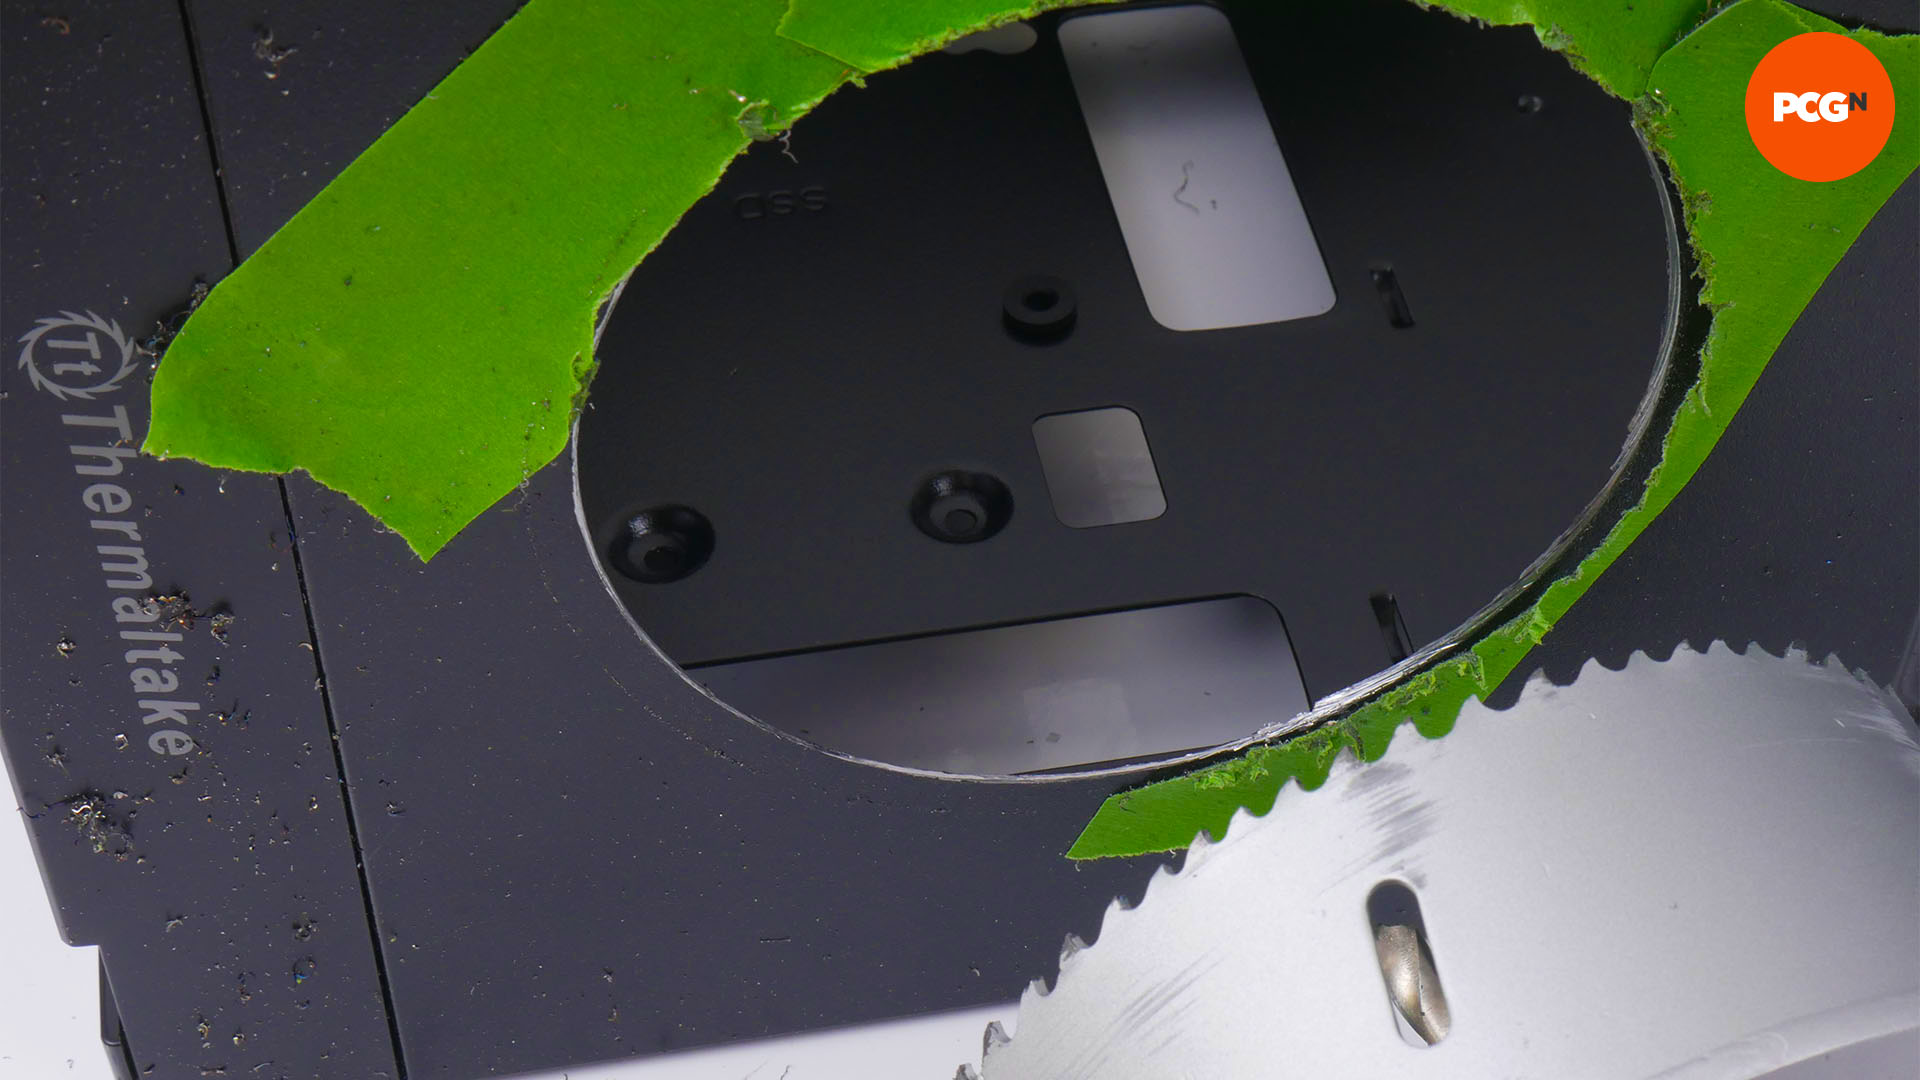 How to add fan mounts to your PC case: Cut with hole saw